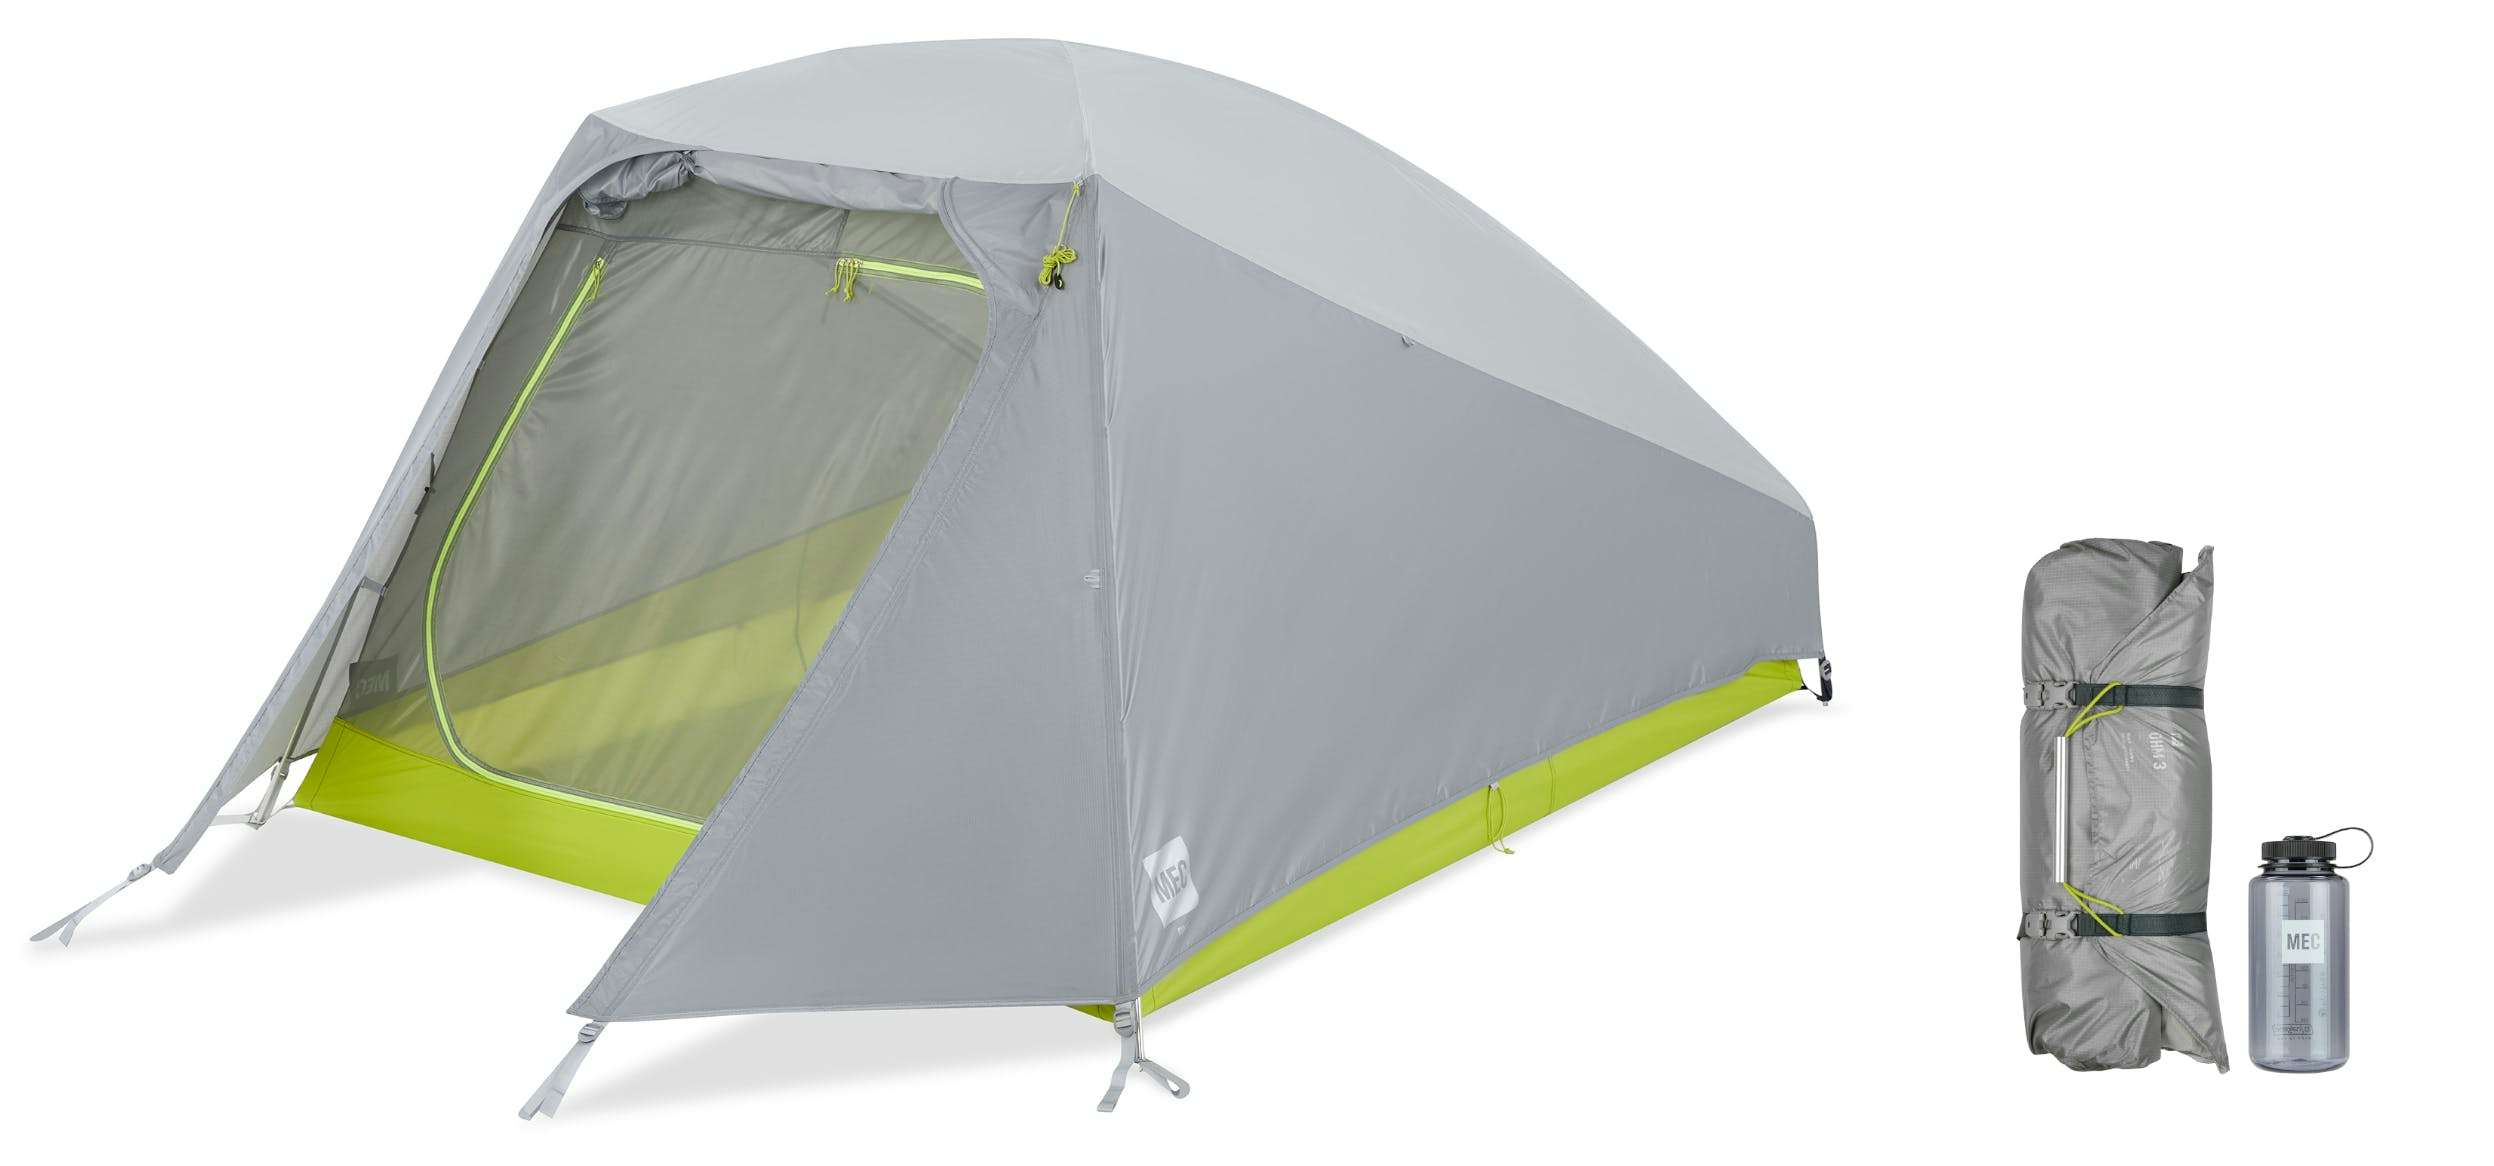 MEC Ohm tent, plus image showing packed version that is about twice the size of a Nalgene bottle